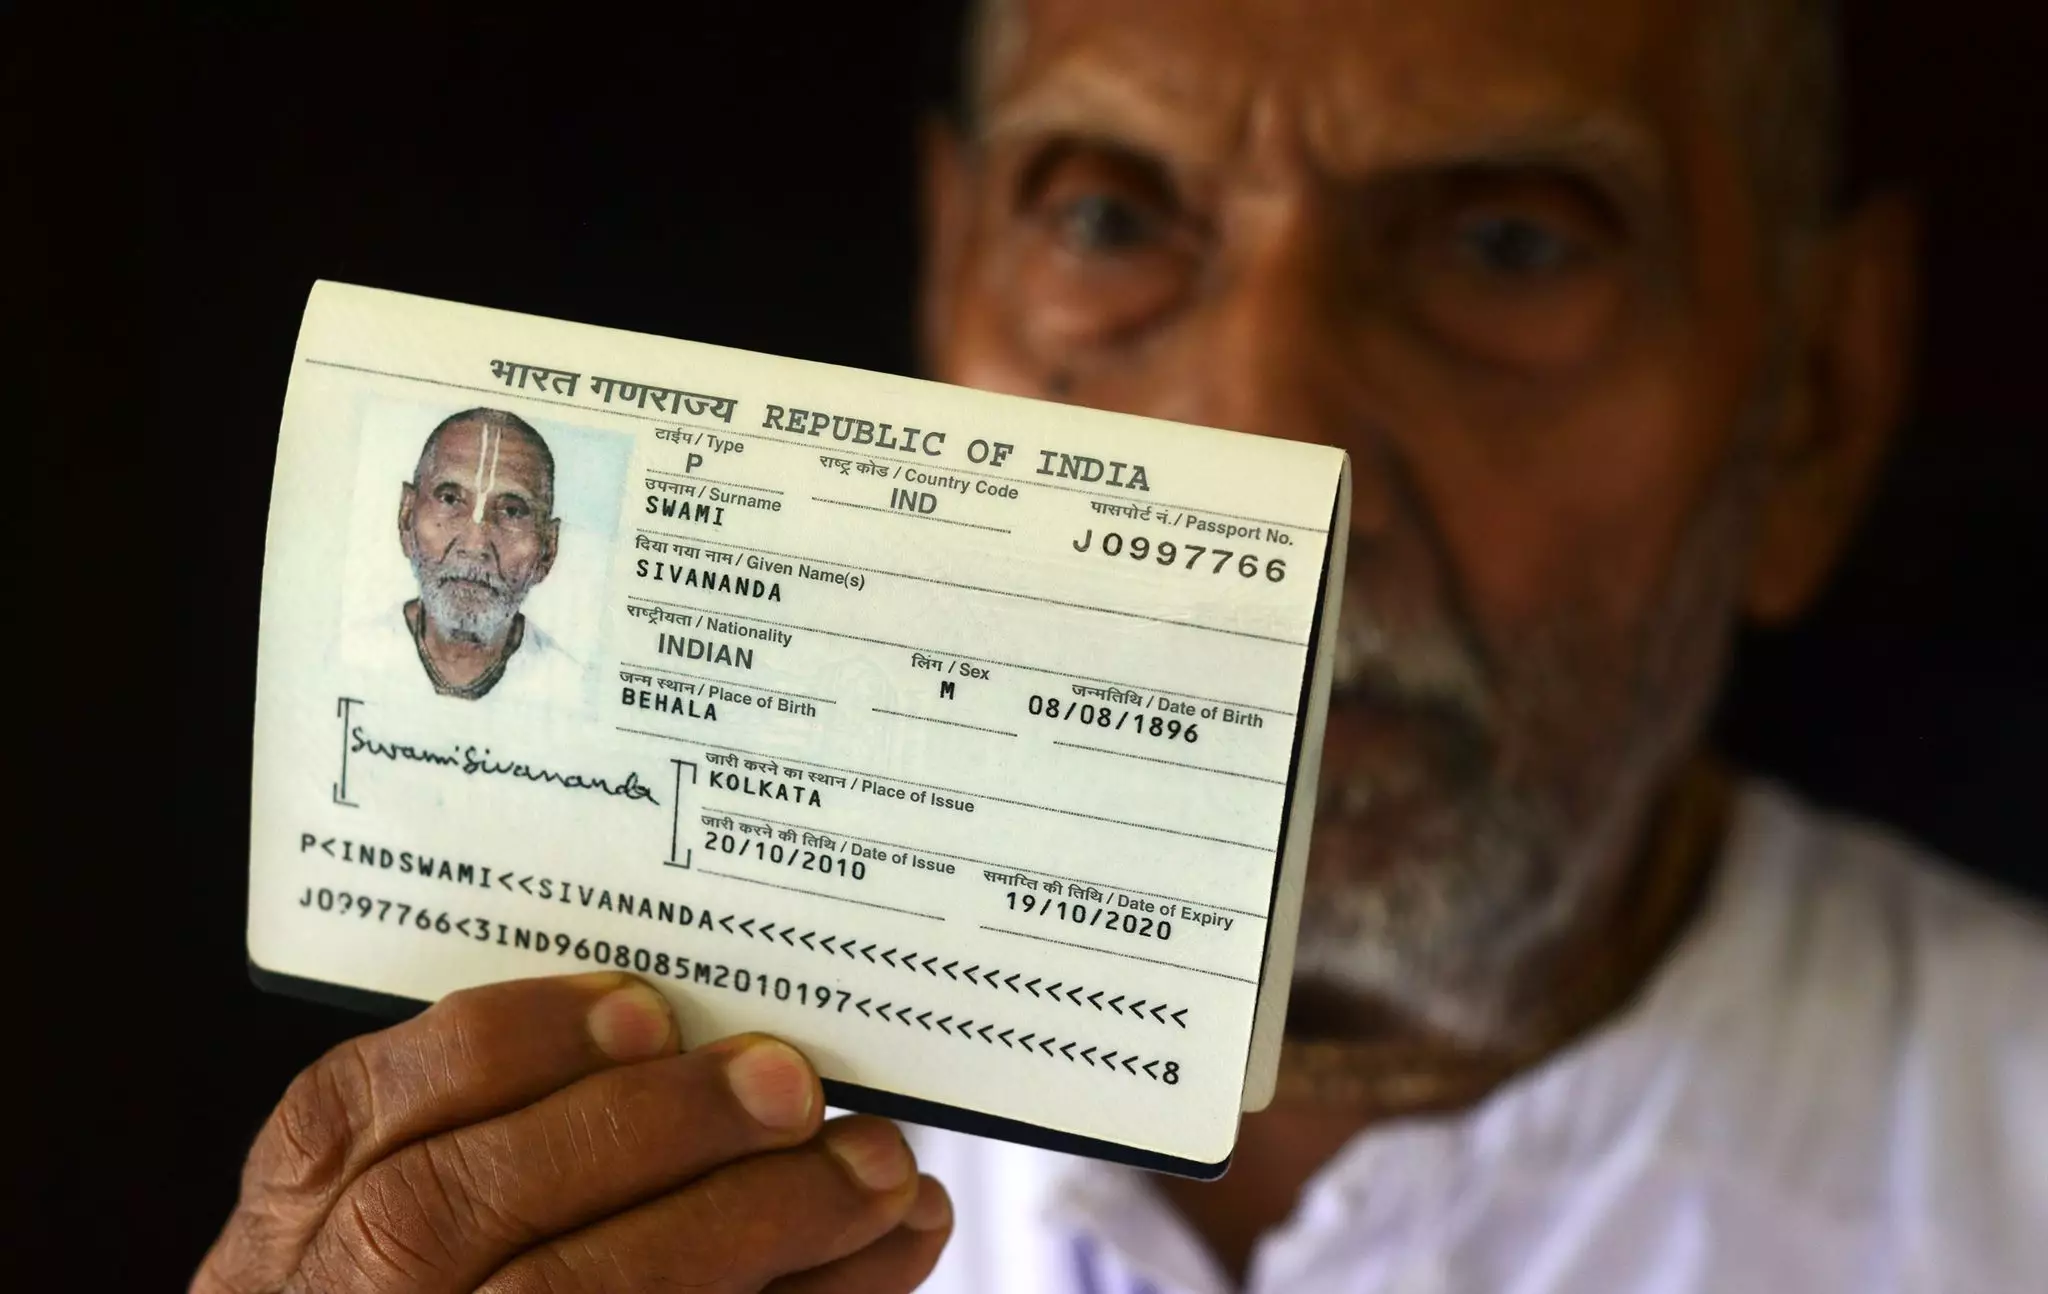 Swami Sivananda shocked airport staff when they saw the date of birth on his passport.